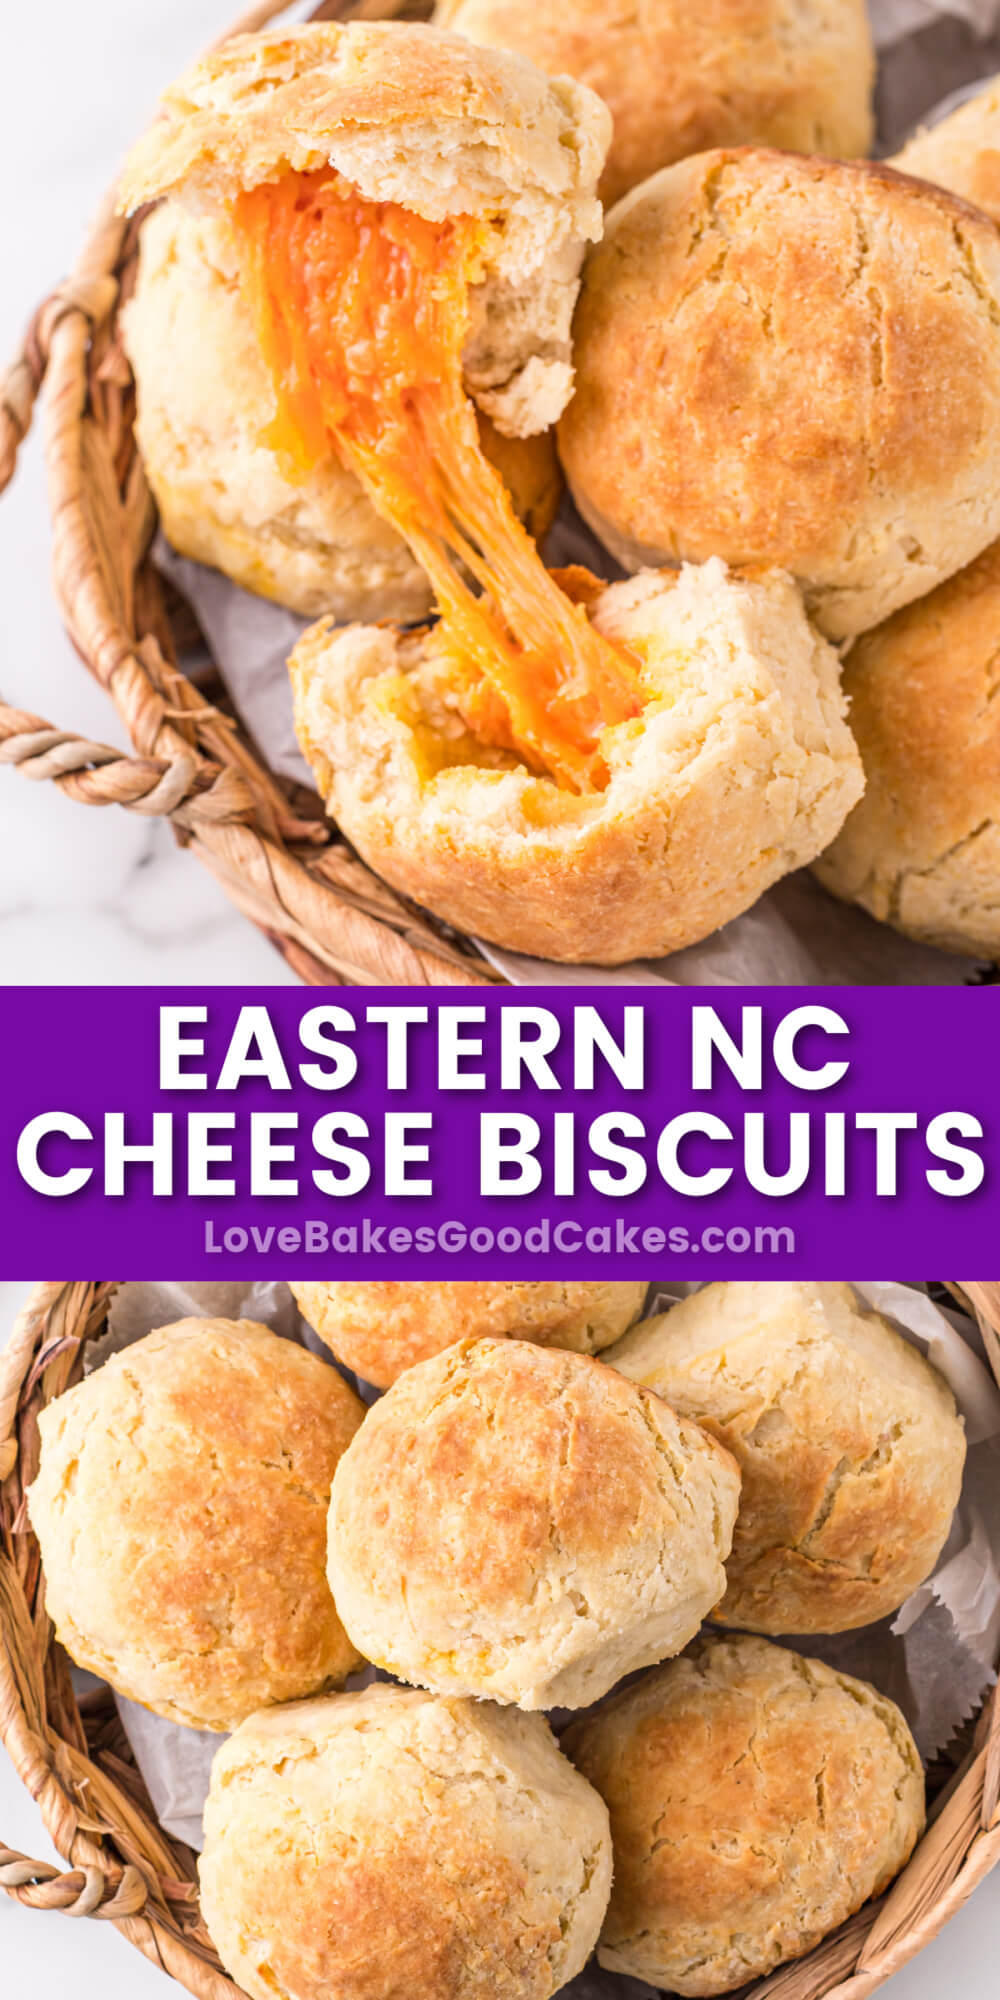 Eastern NC Cheese Biscuits - Love Bakes Good Cakes